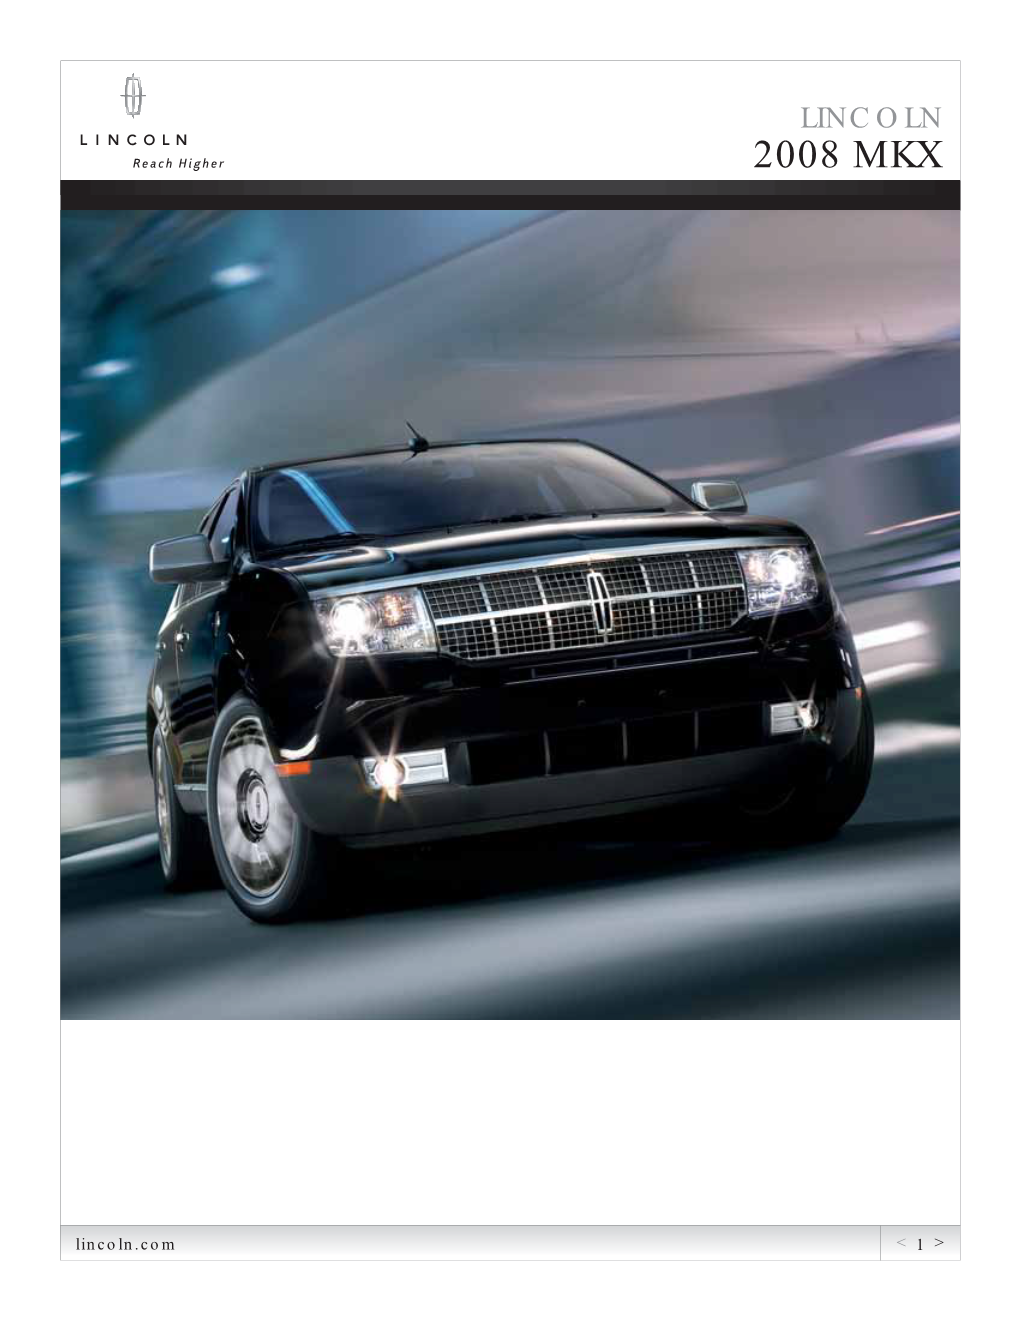 Lincoln 2008 Mkx